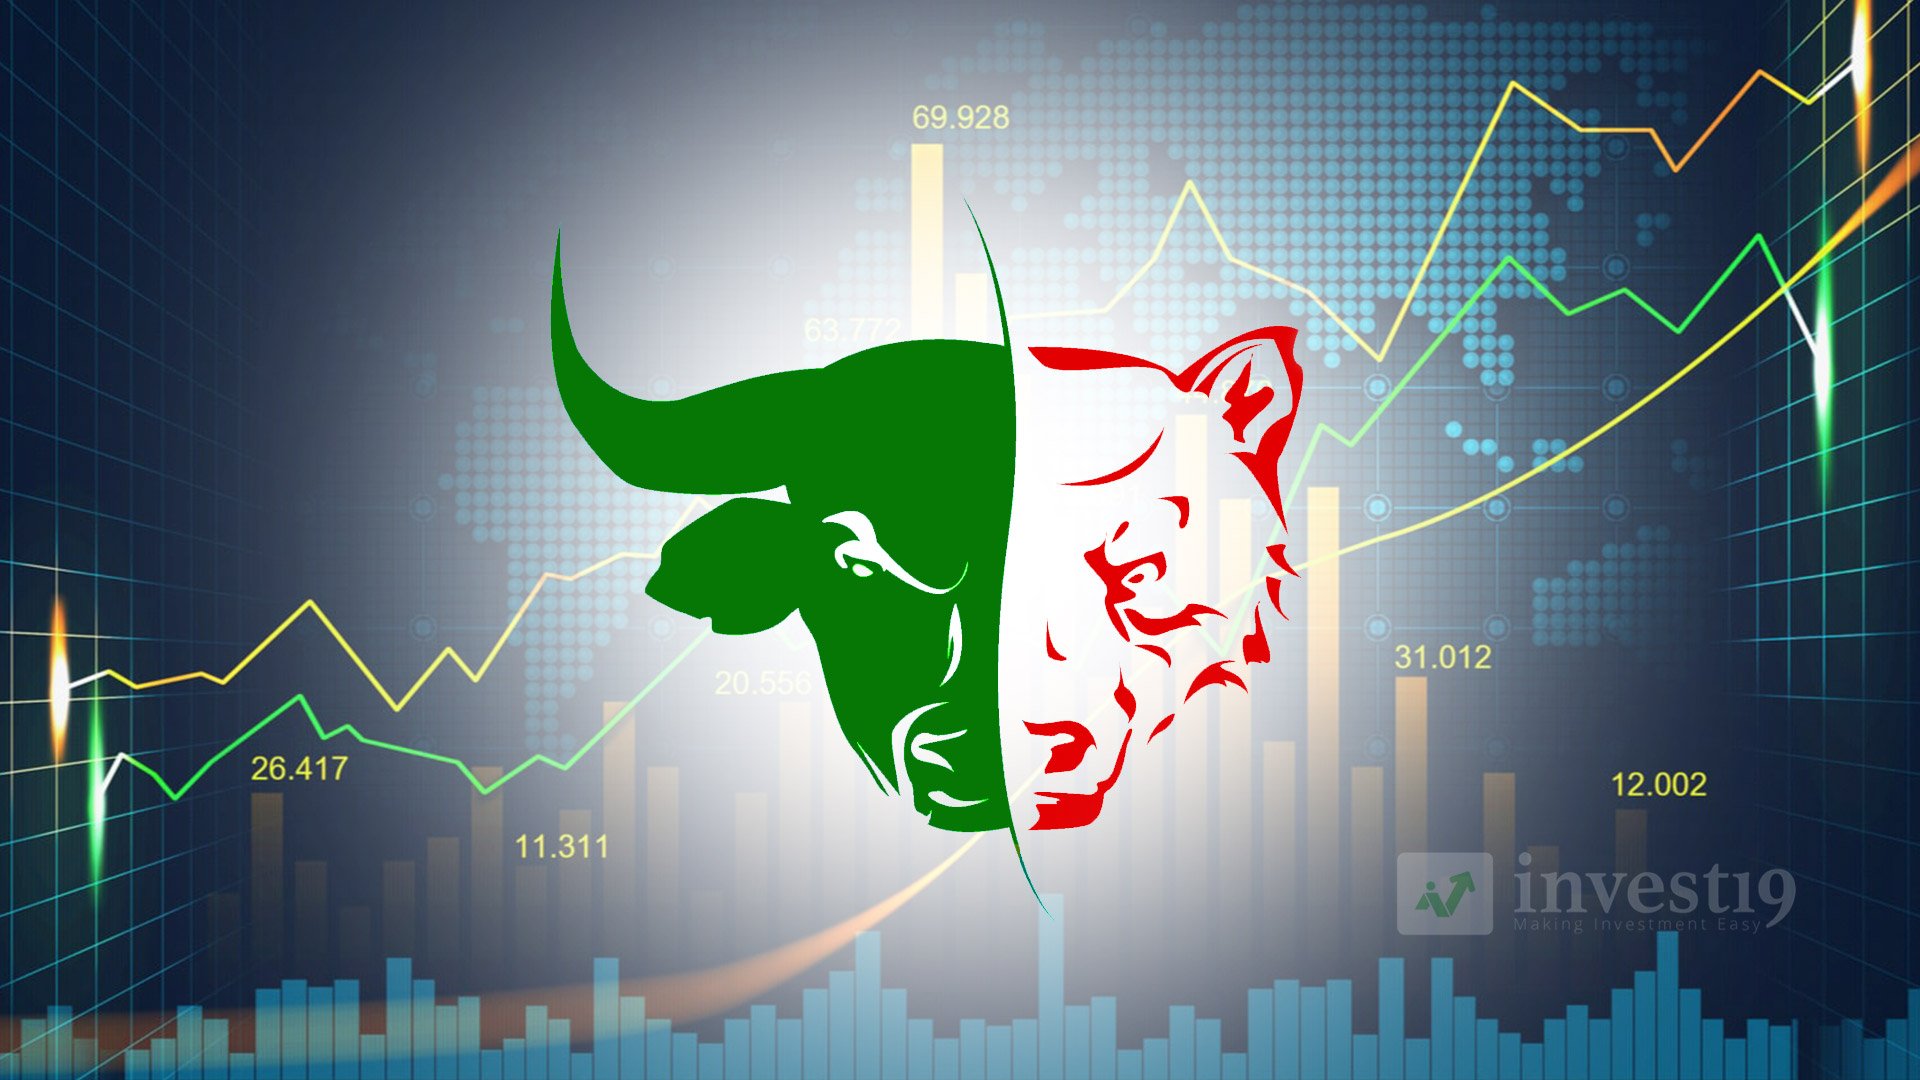 Bull bear investing bnm malaysia cryptocurrency